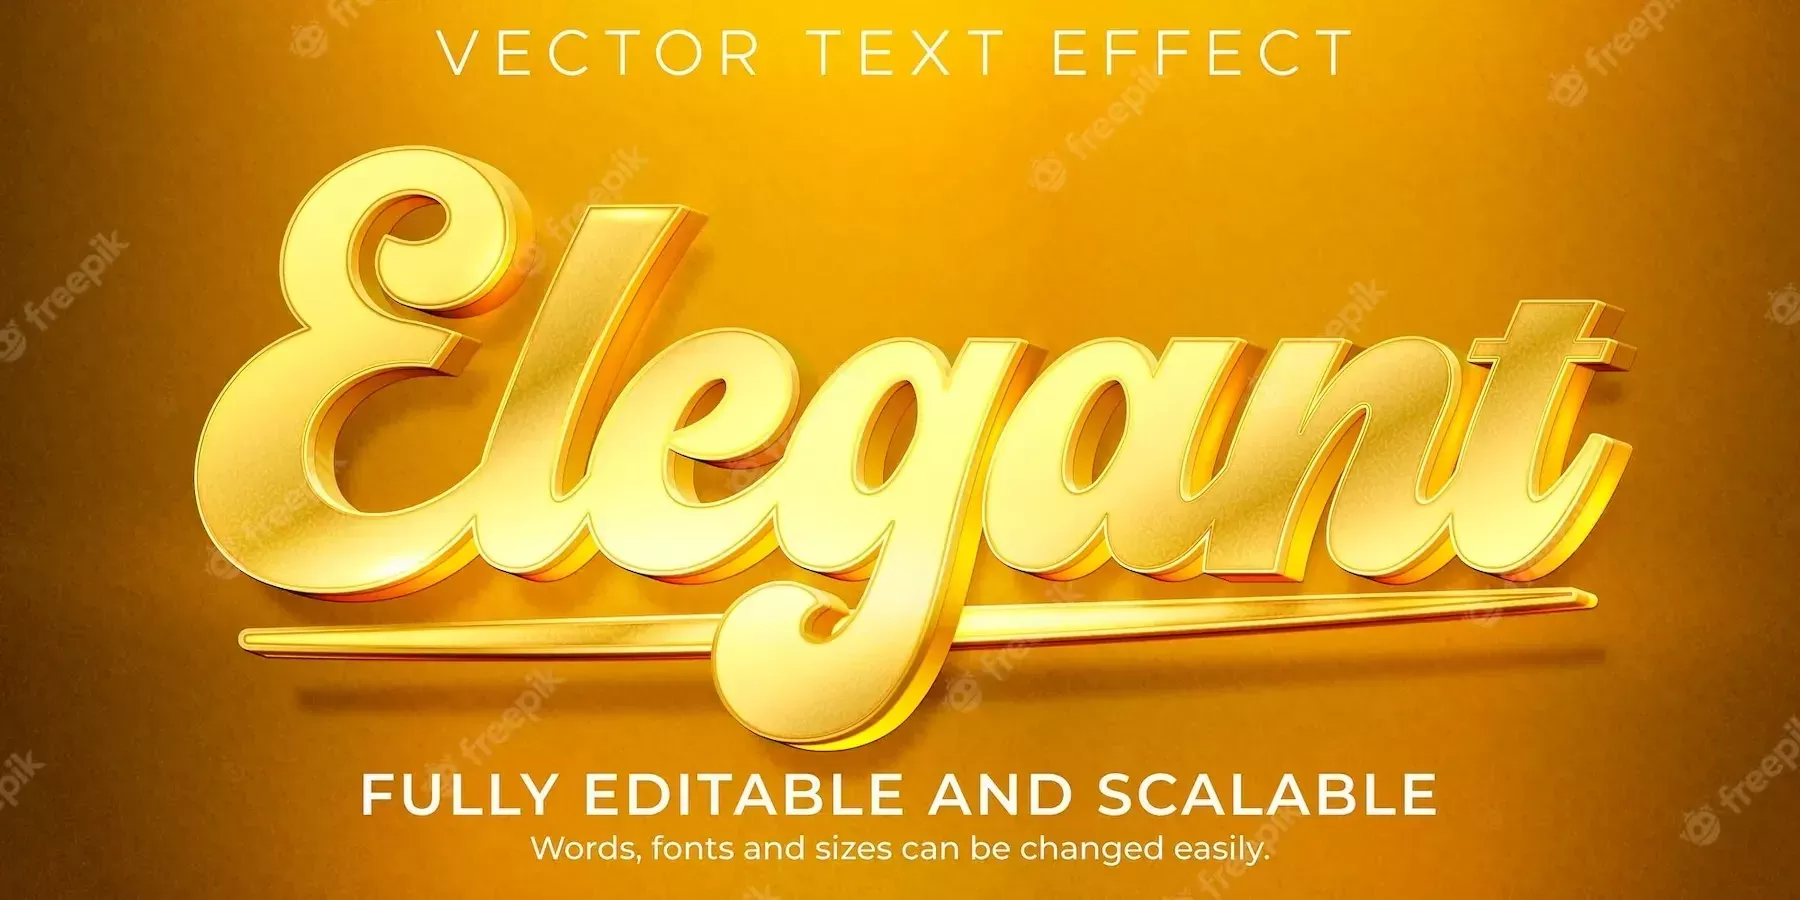 Golden elegant text effect editable luxury and shiny text style